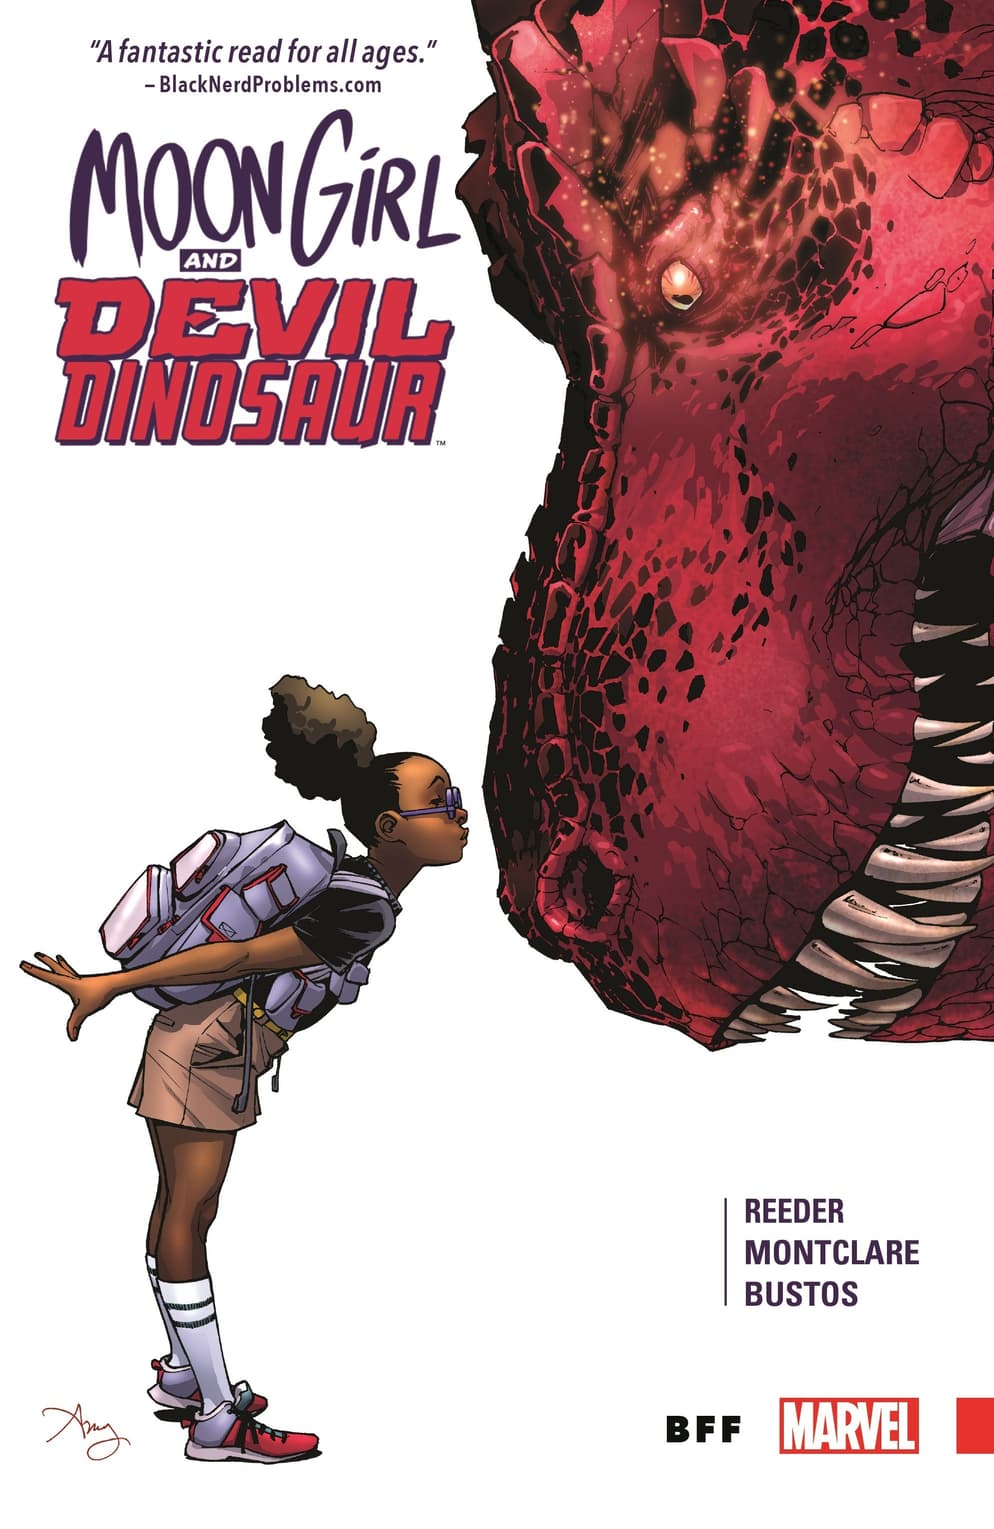 Cover to MOON GIRL AND DEVIL DINOSAUR VOL. 1: BFF.